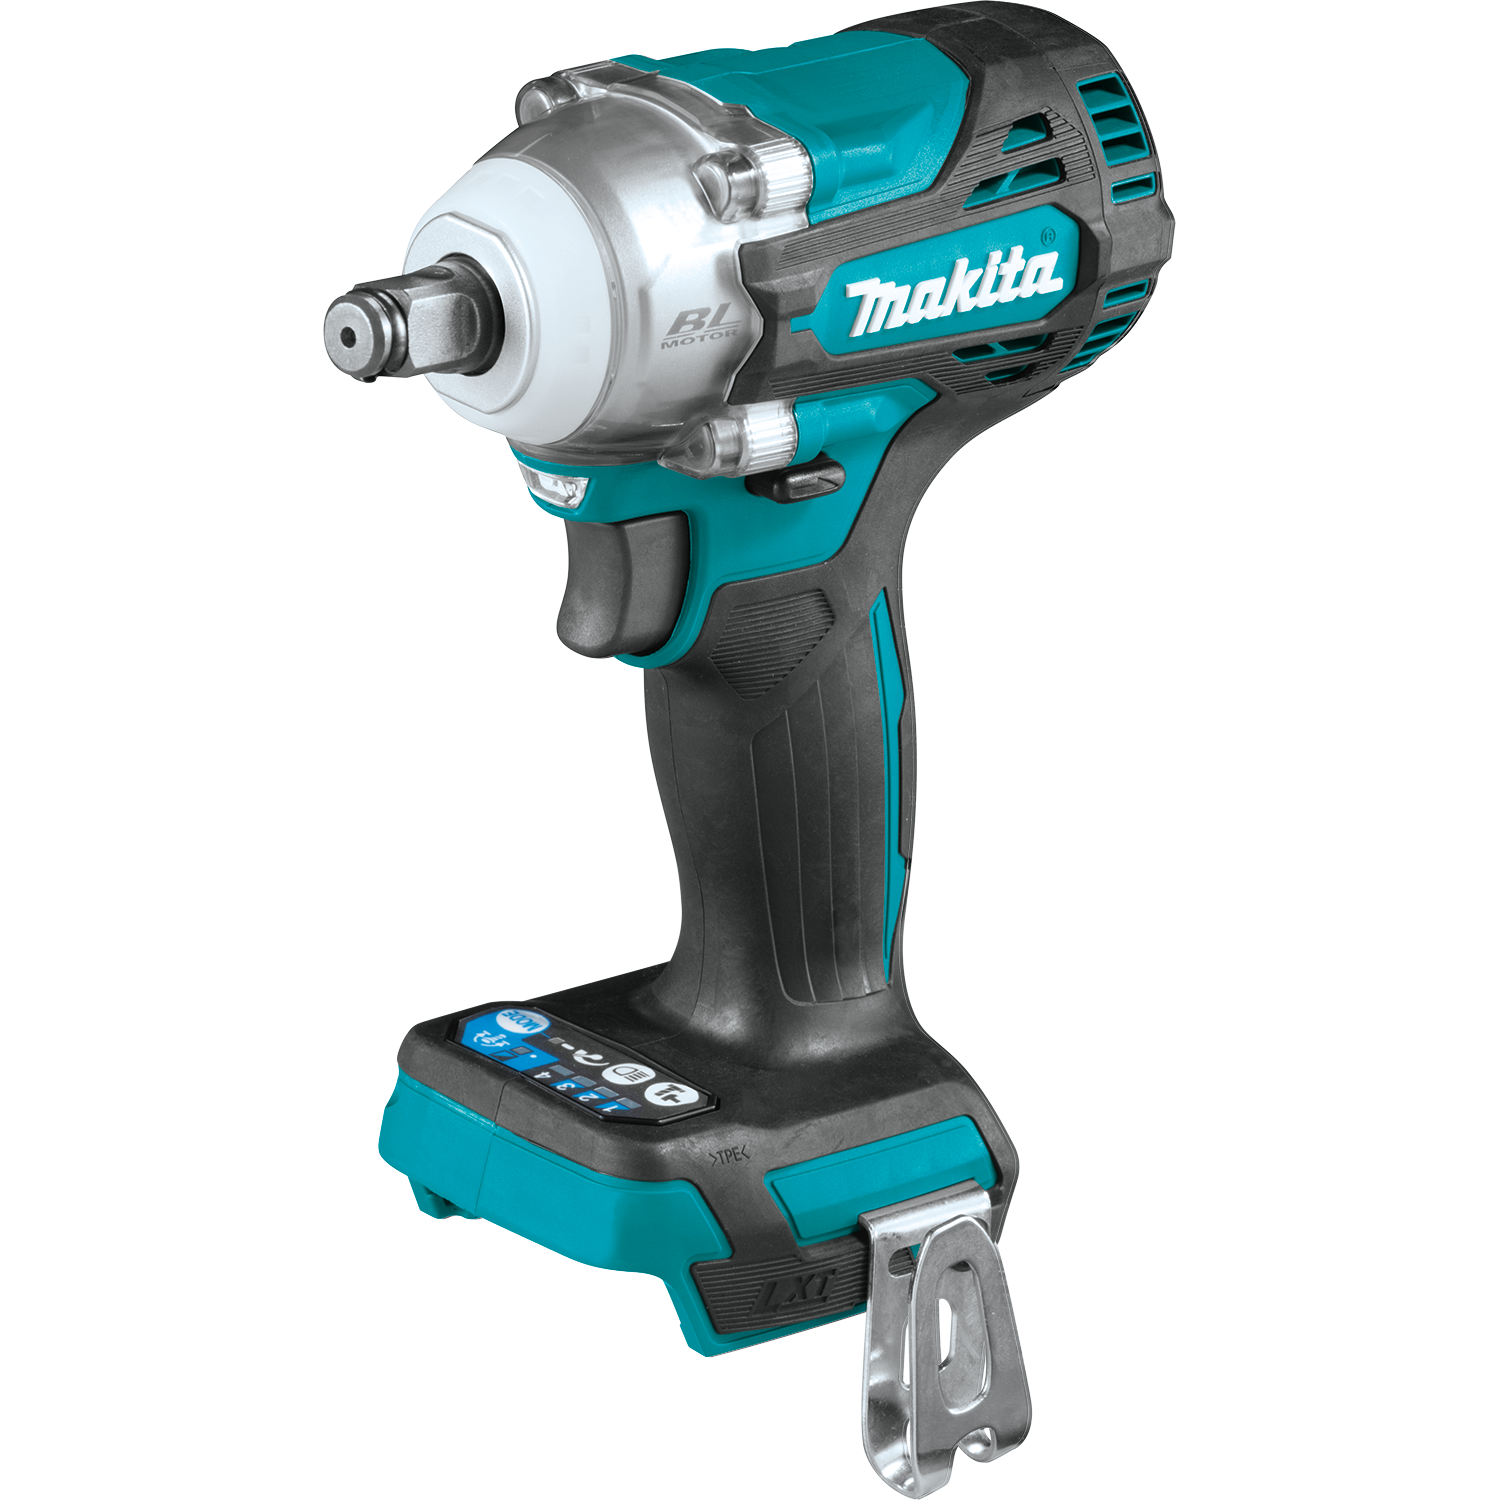 DTW300Z CORDLESS IMPACT WRENCH